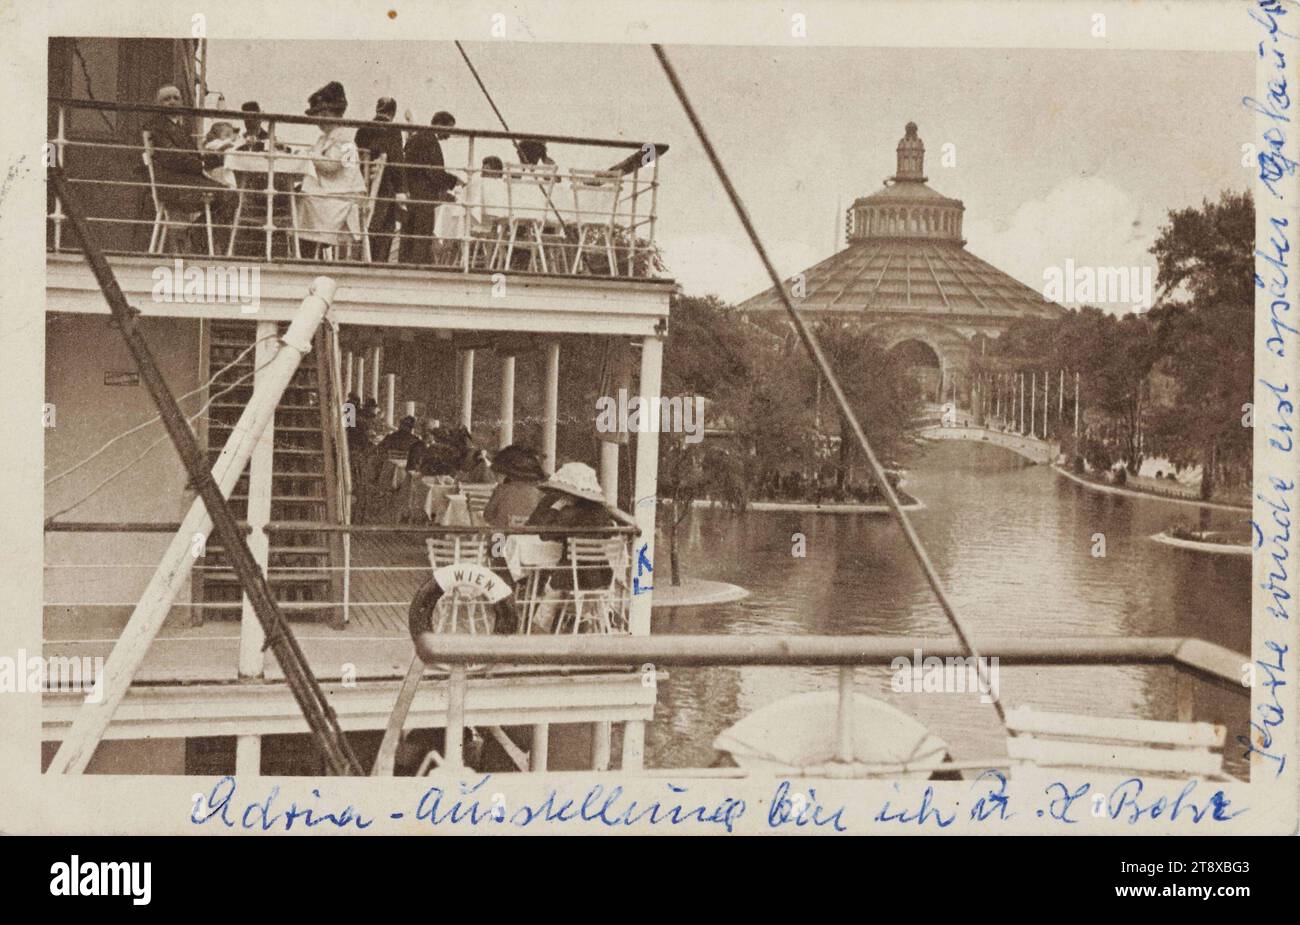 View from the Lloyd steamer 'Vienna', Kilophot (K. L.) (1905-1930), Producer, 1913, paperboard, rotogravure, height×width 9×14 cm, Inscription, FROM, Vienna, TO, Ebergassing, Vienna, ADDRESS, Wolg., Herr, Ebergassing, Vienna, Colony, MESSAGE, Dear Heinz!!!, the warmest greetings, from the Adria-Aus, stellung sends you, your in loyalty, devoted, Lina, Schmidt (M.?) (further signature), In the upper left corner:, Again kisses, from the little, devil (? ), Image page:, Adria exhibition I am u. H. Bohr, card was purchased later, (mark visible in the picture), Prater, Attractions Stock Photo